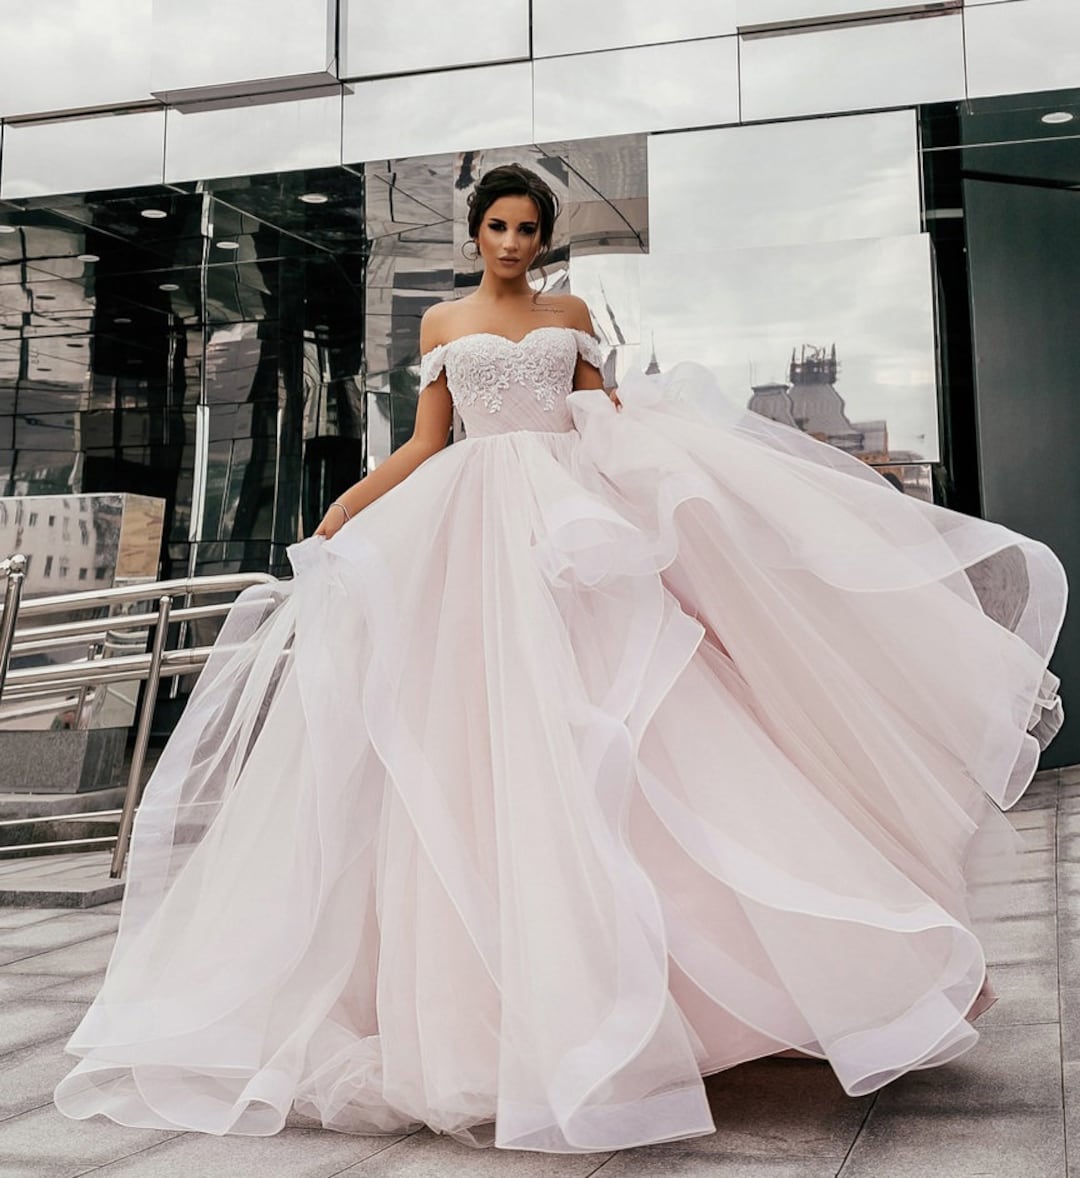 Off Shoulder Wedding Dress With Ruffle, Lace Bodice and Tulle